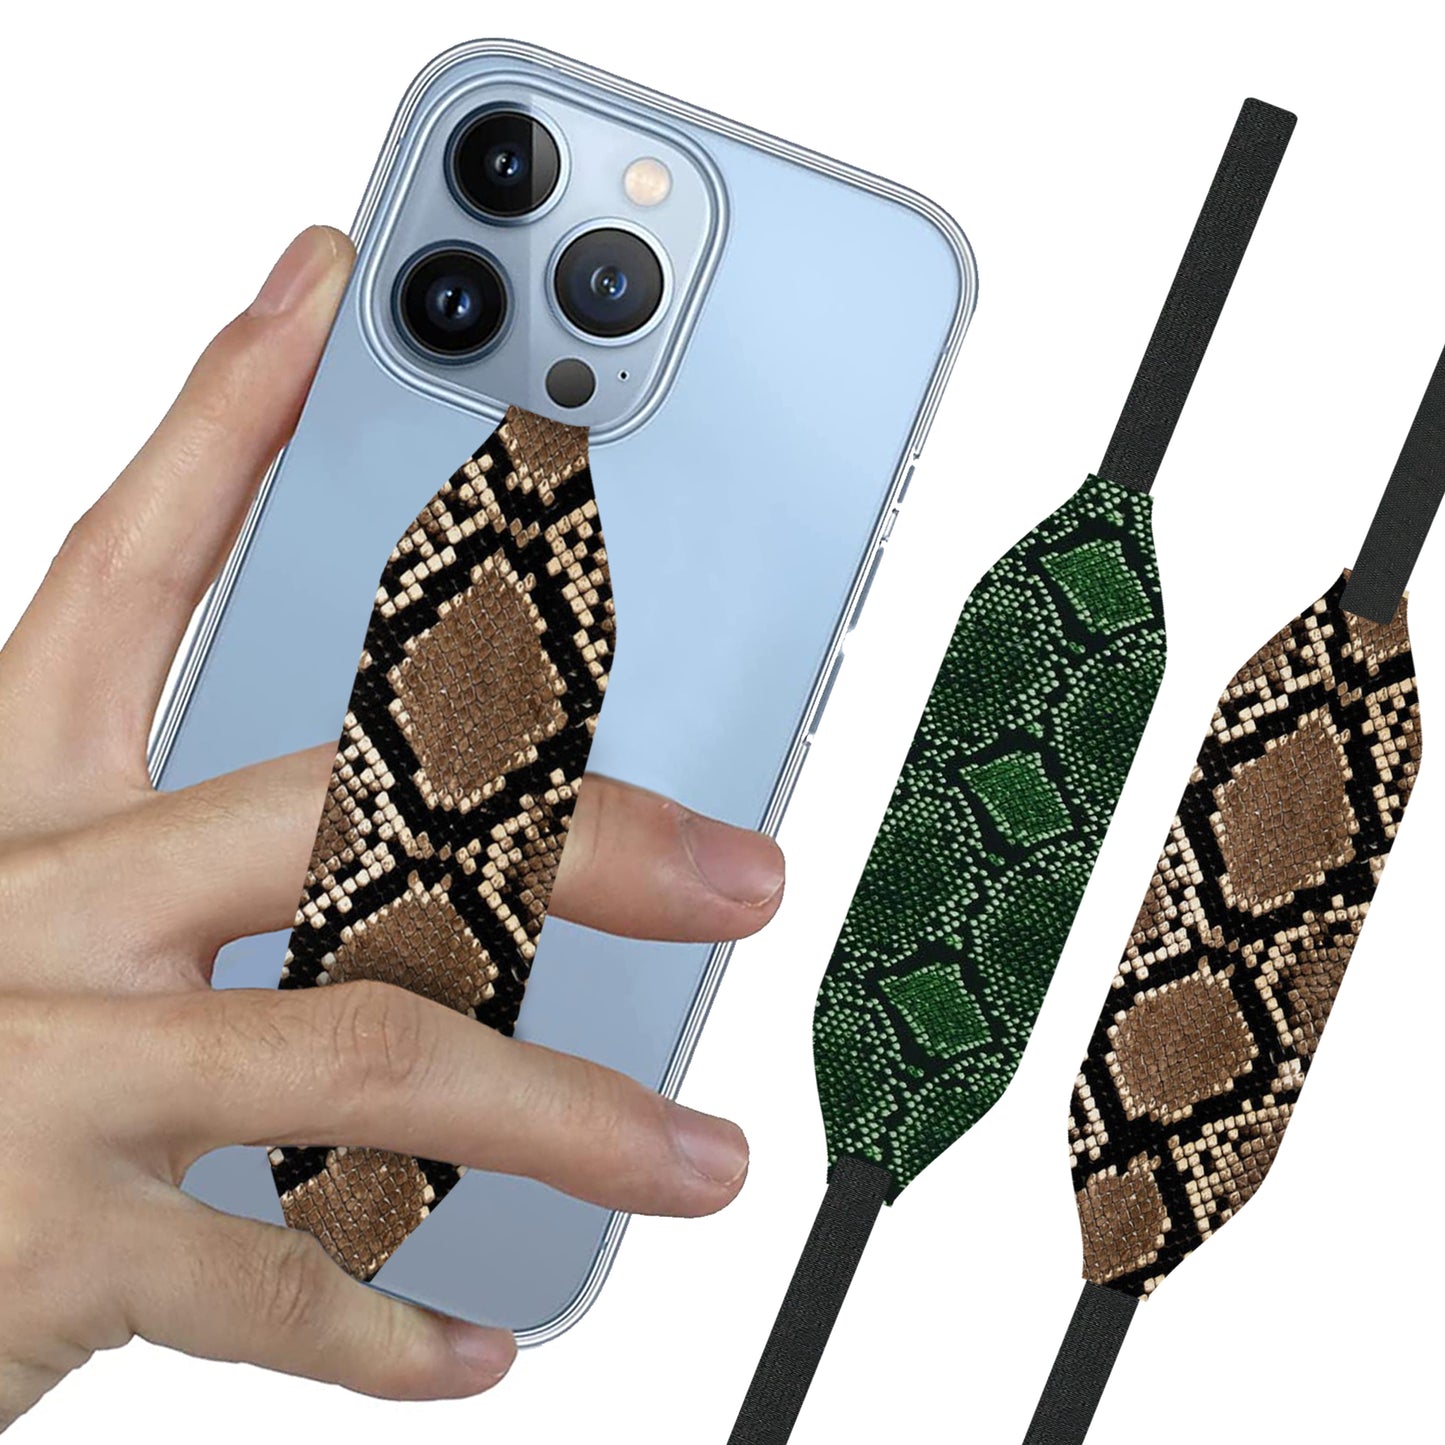 Switchbands Universal Stretchable Phone Hand Straps And Finger Loop For Phone Cases - Brown & Green Snake Skin